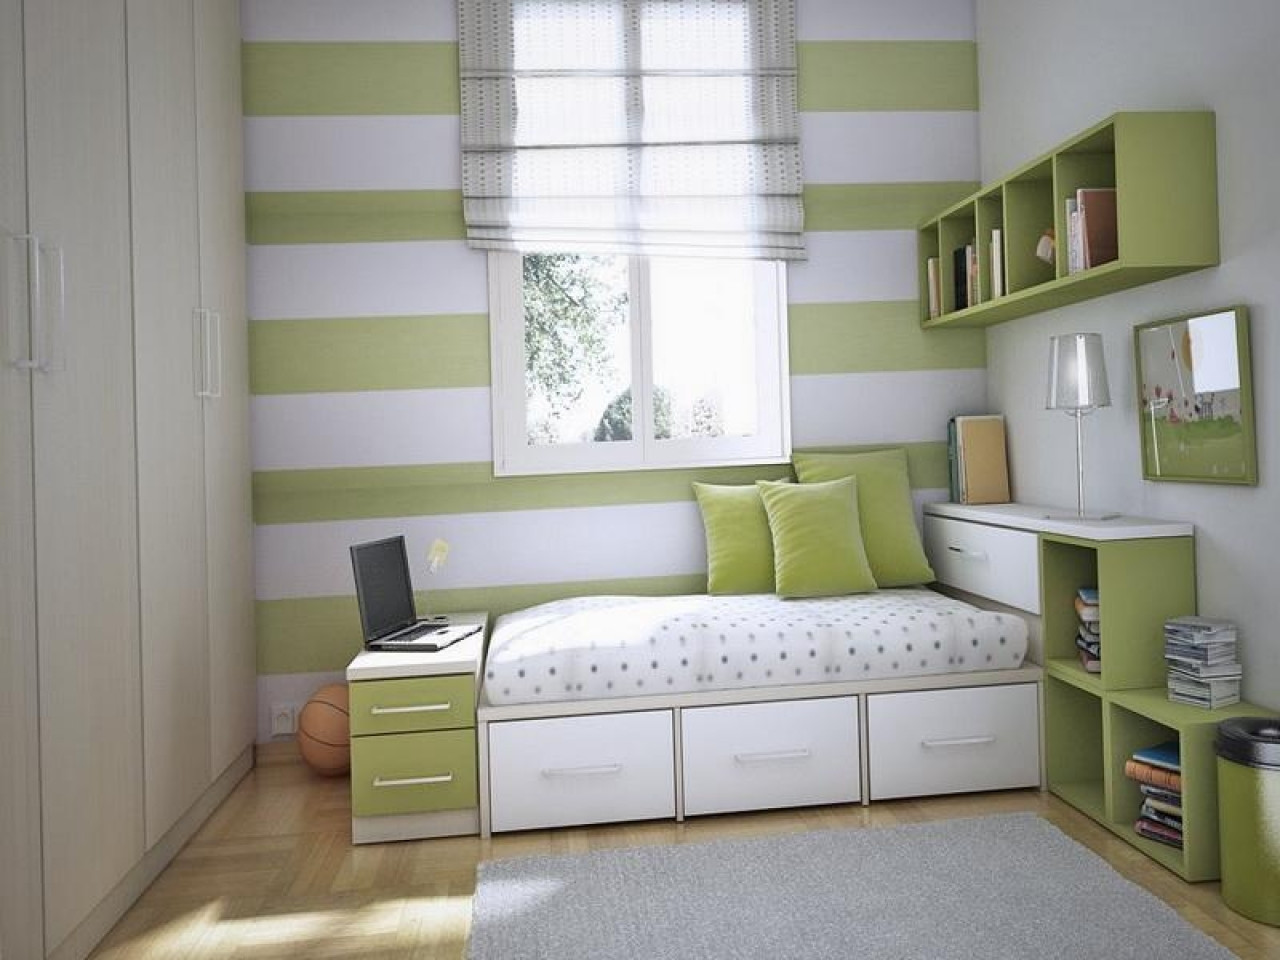 Storage Solutions For Small Bedroom
 Bed solutions for small bedrooms bedroom storage ideas